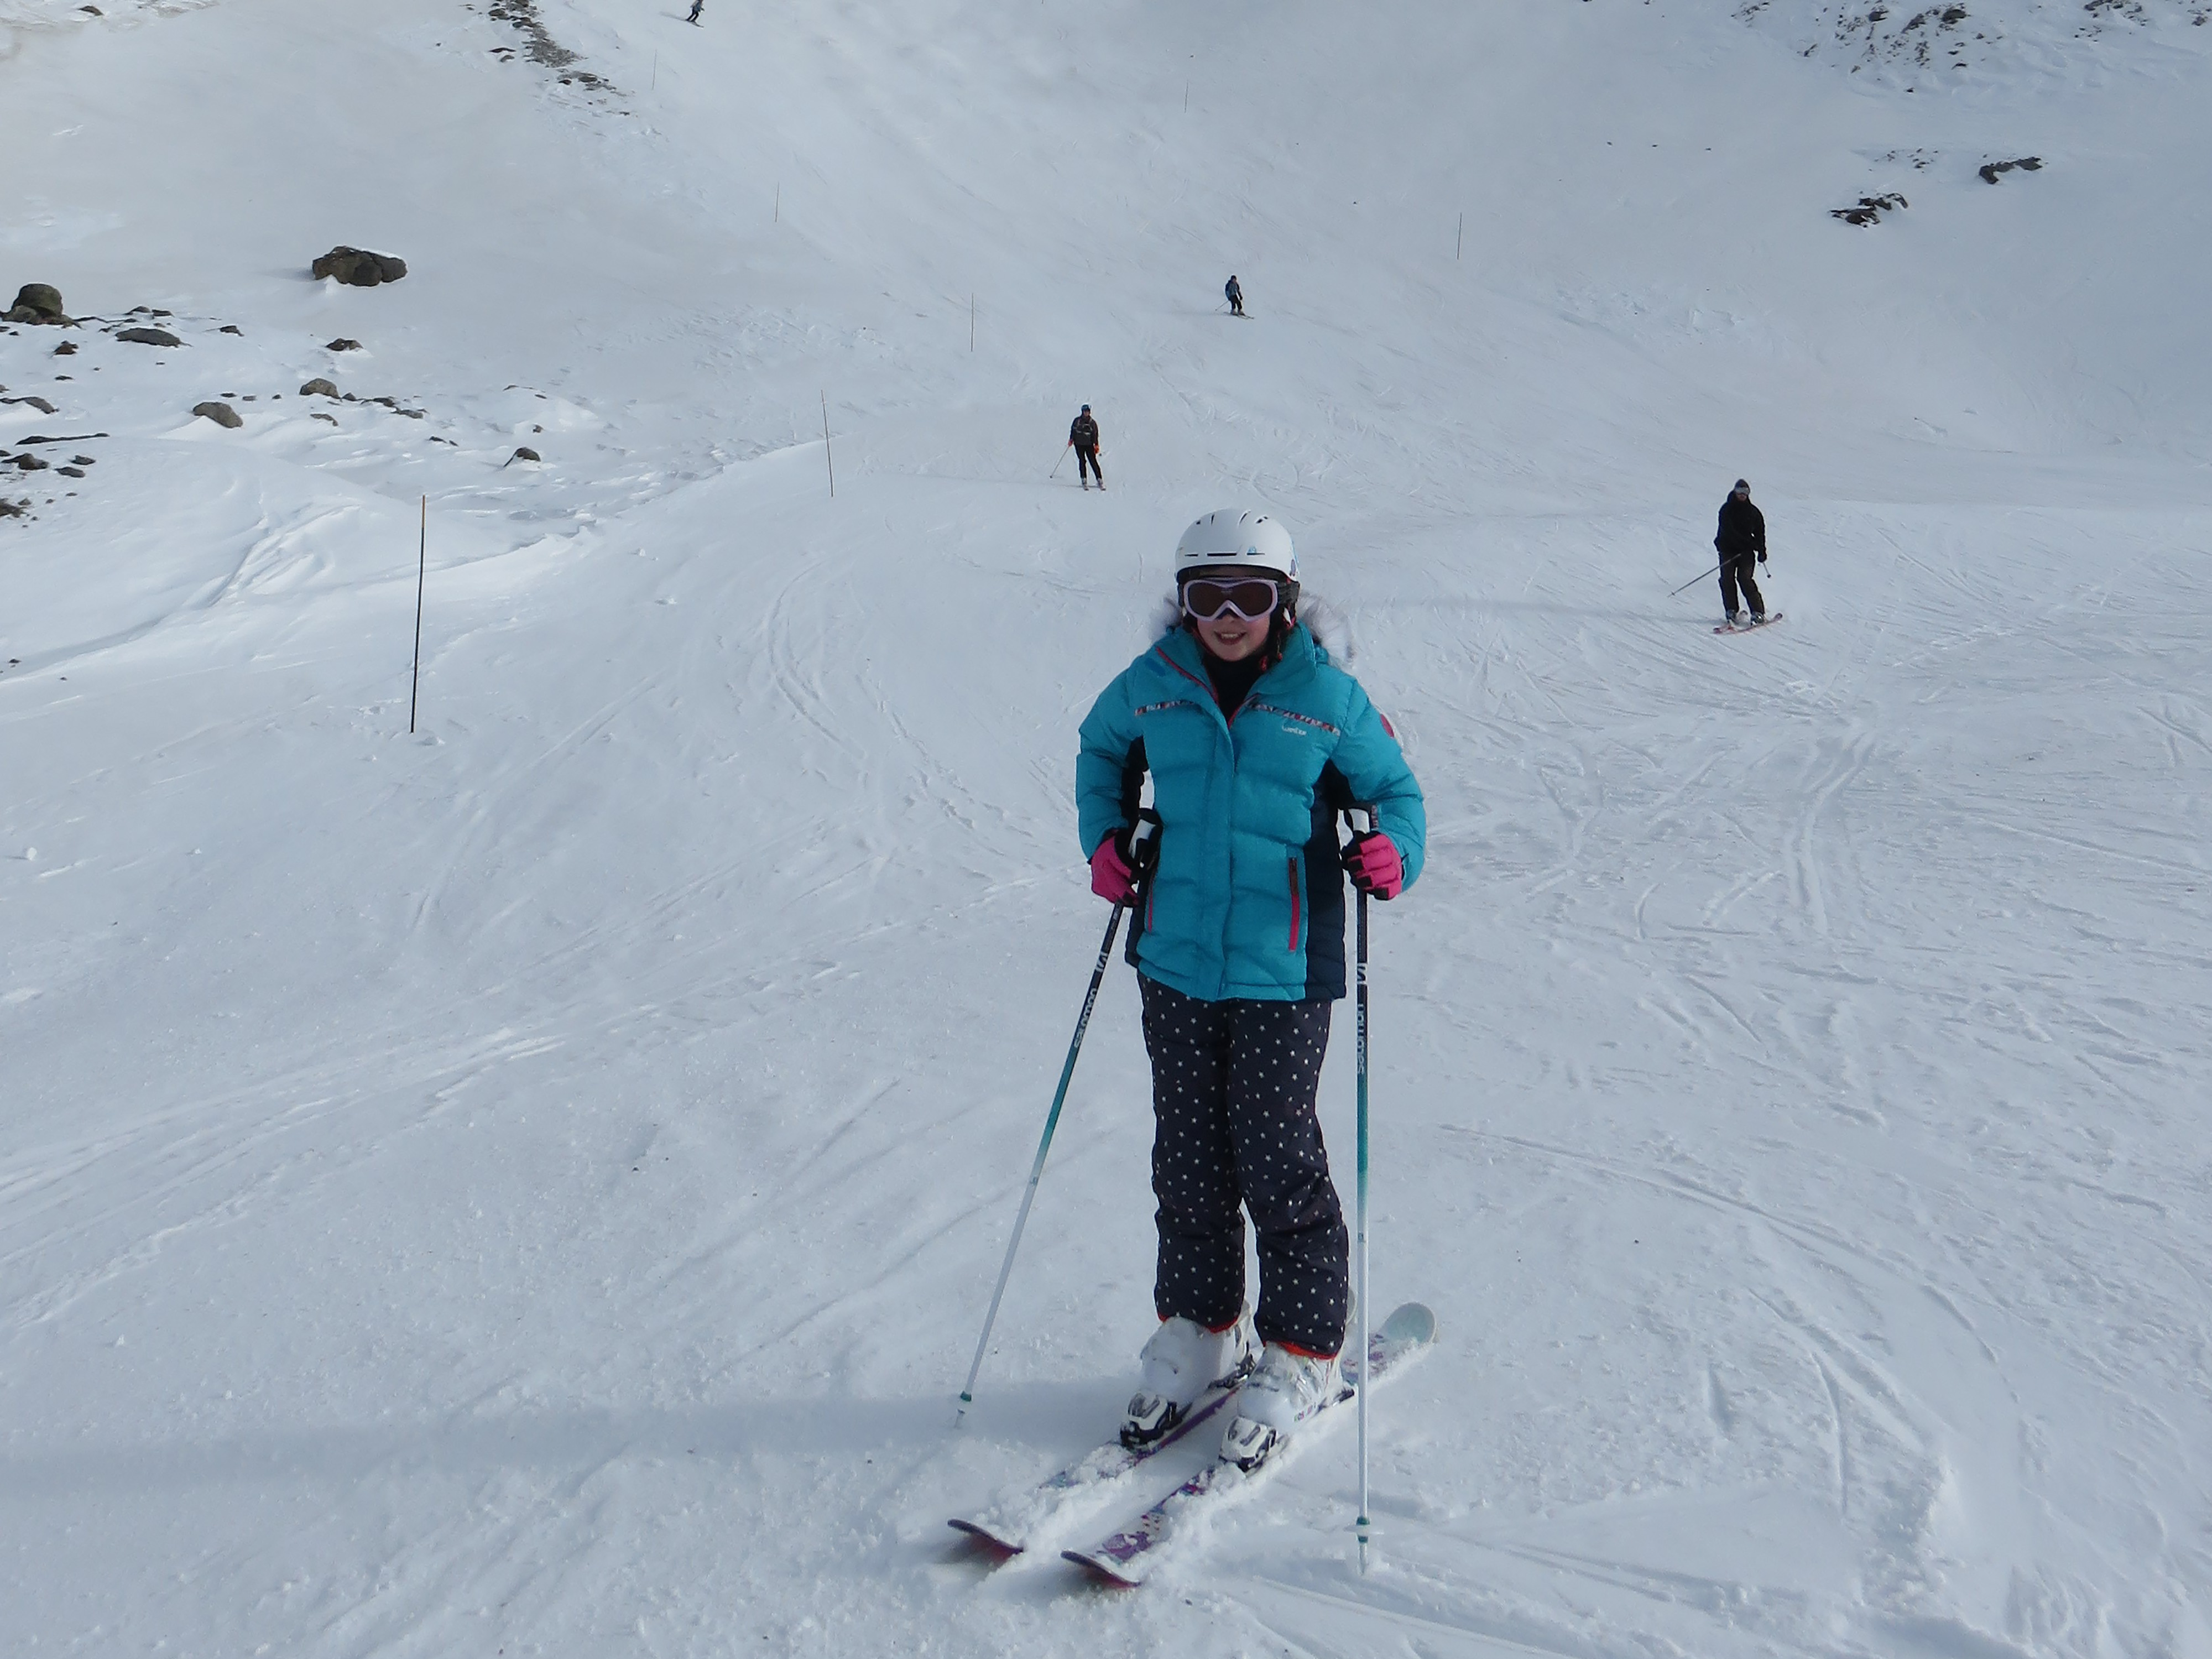 The thrill of Christmas Day skiing